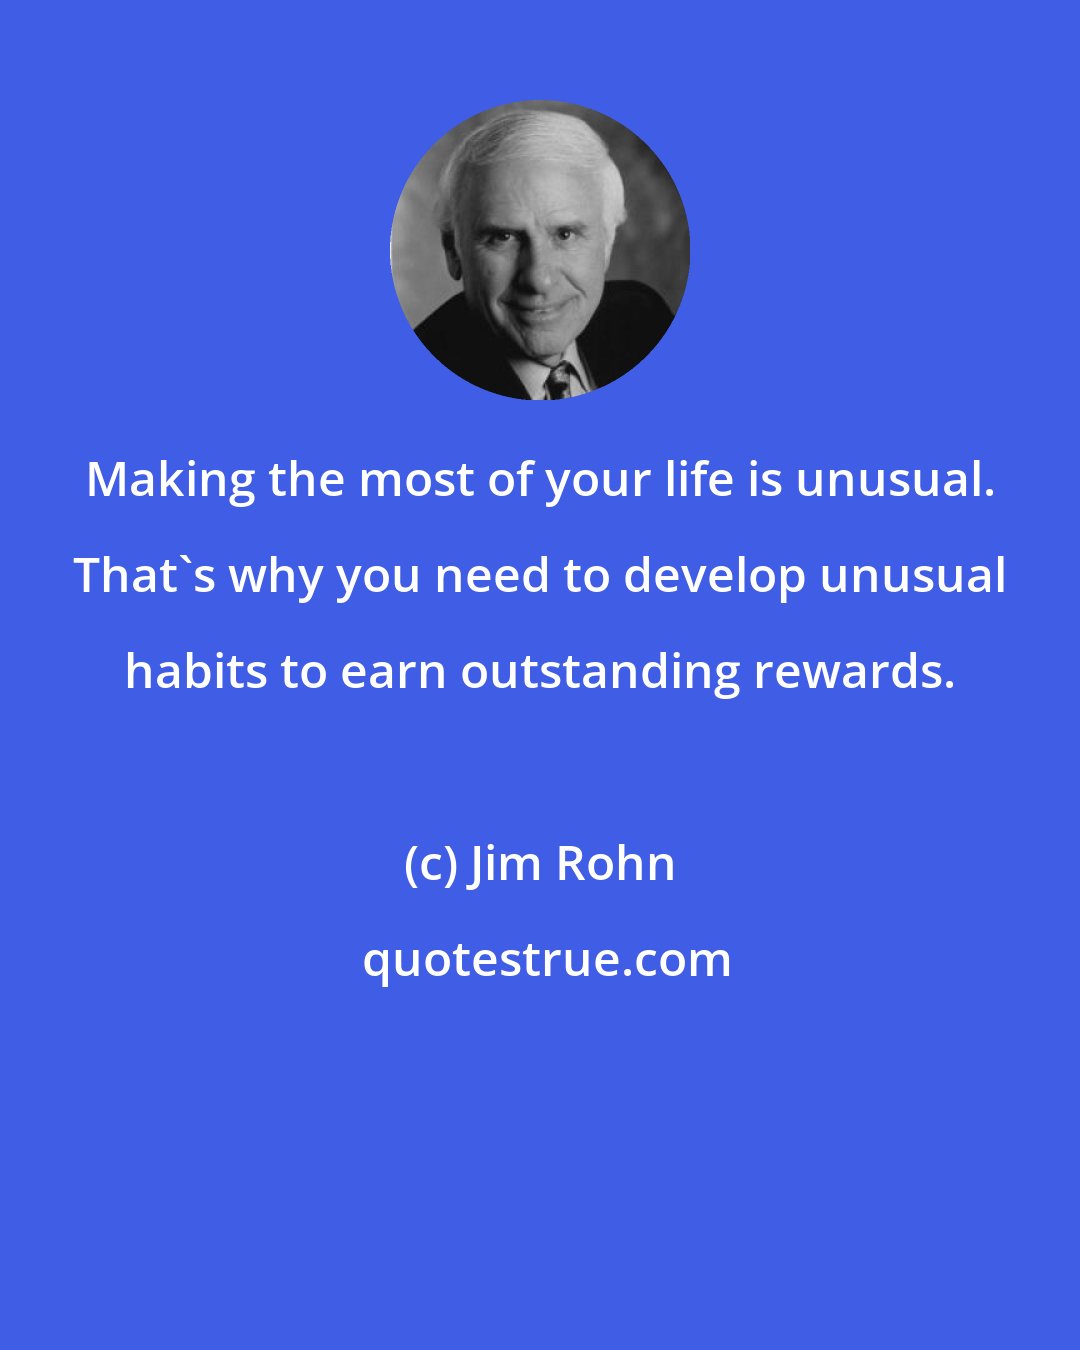 Jim Rohn: Making the most of your life is unusual. That's why you need to develop unusual habits to earn outstanding rewards.